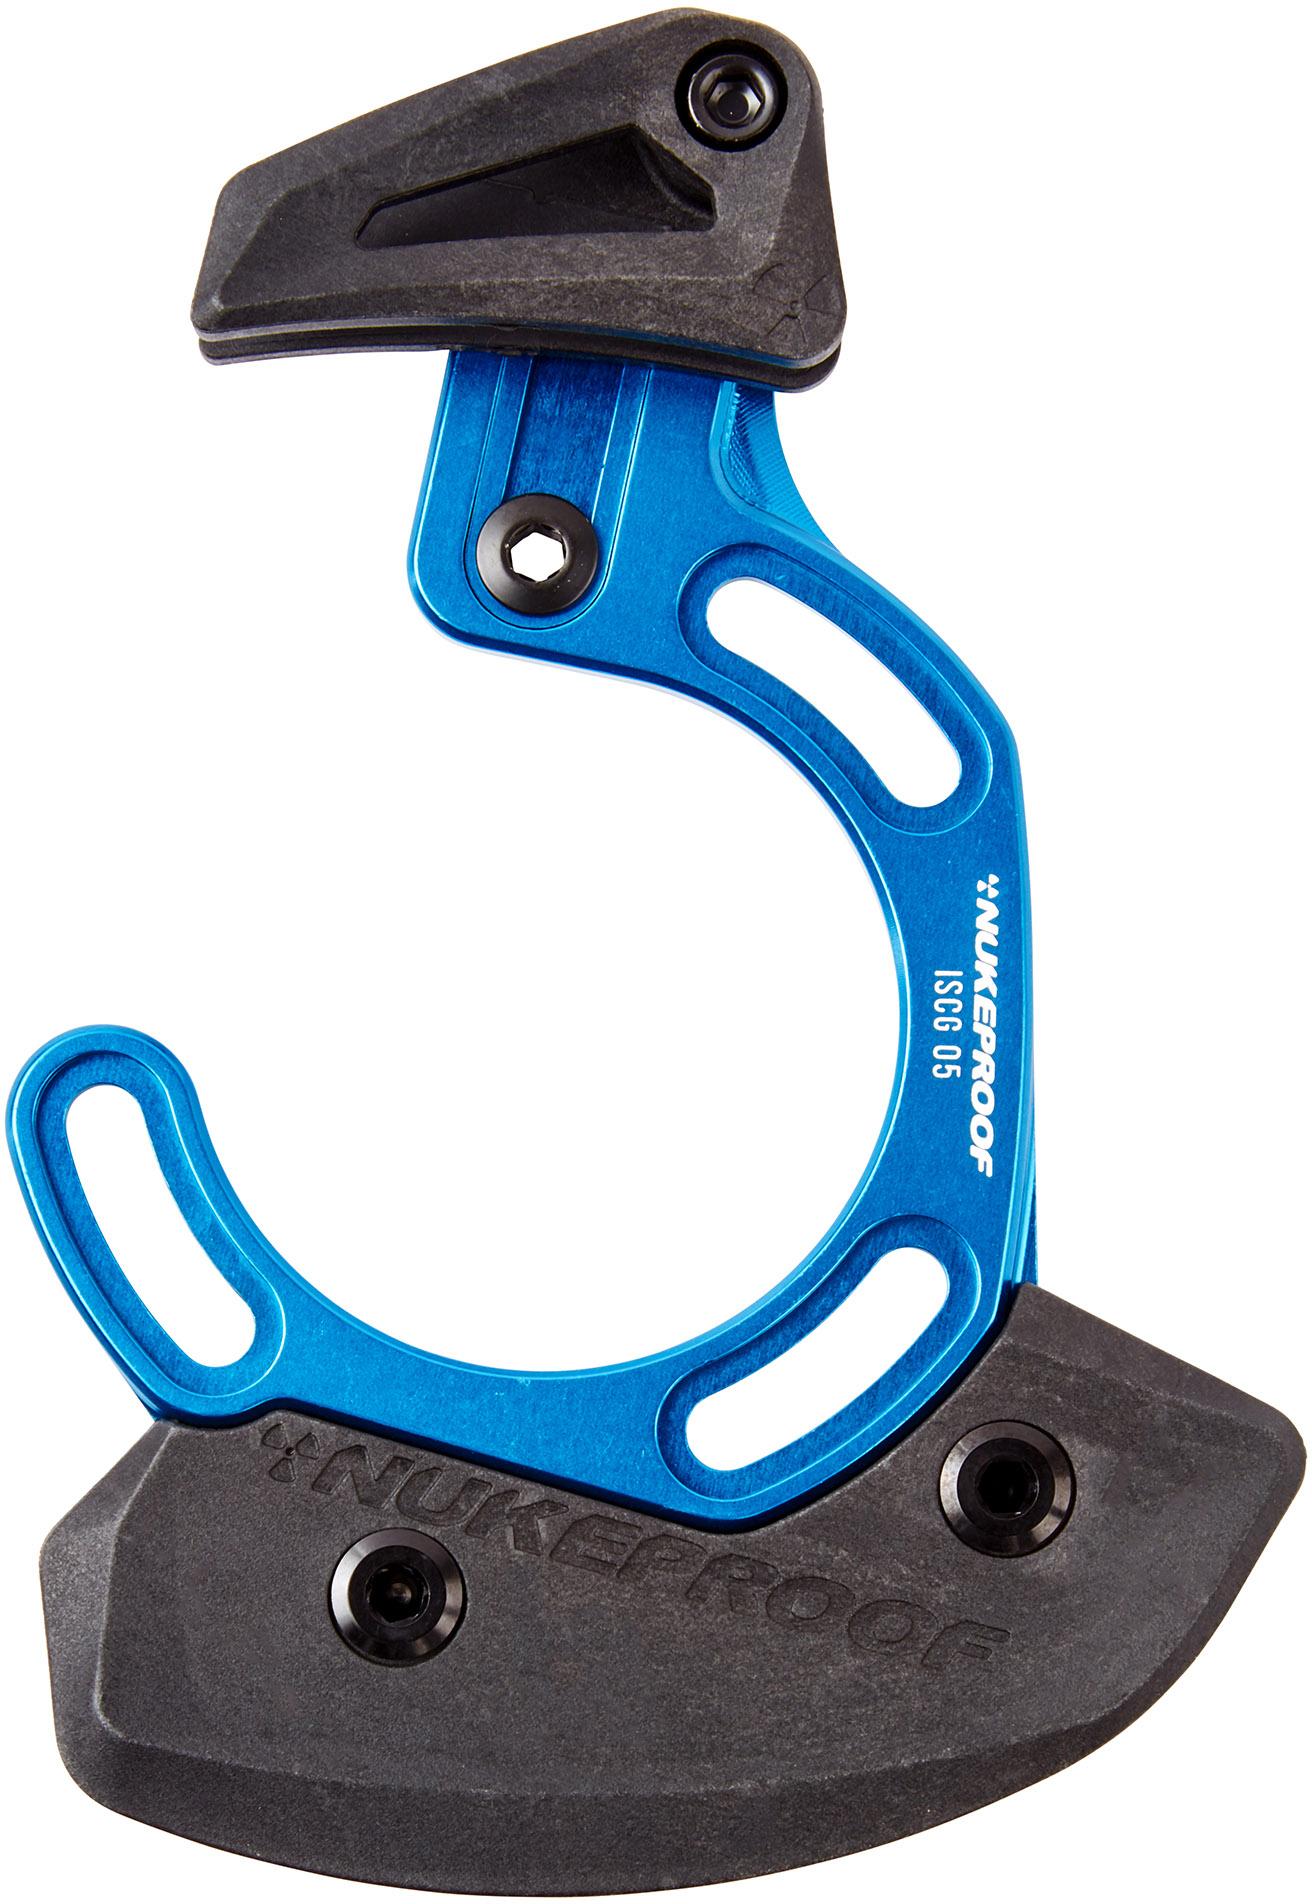 Nukeproof Chain Guide Iscg 05 Top Guide With Bash  Blue/black